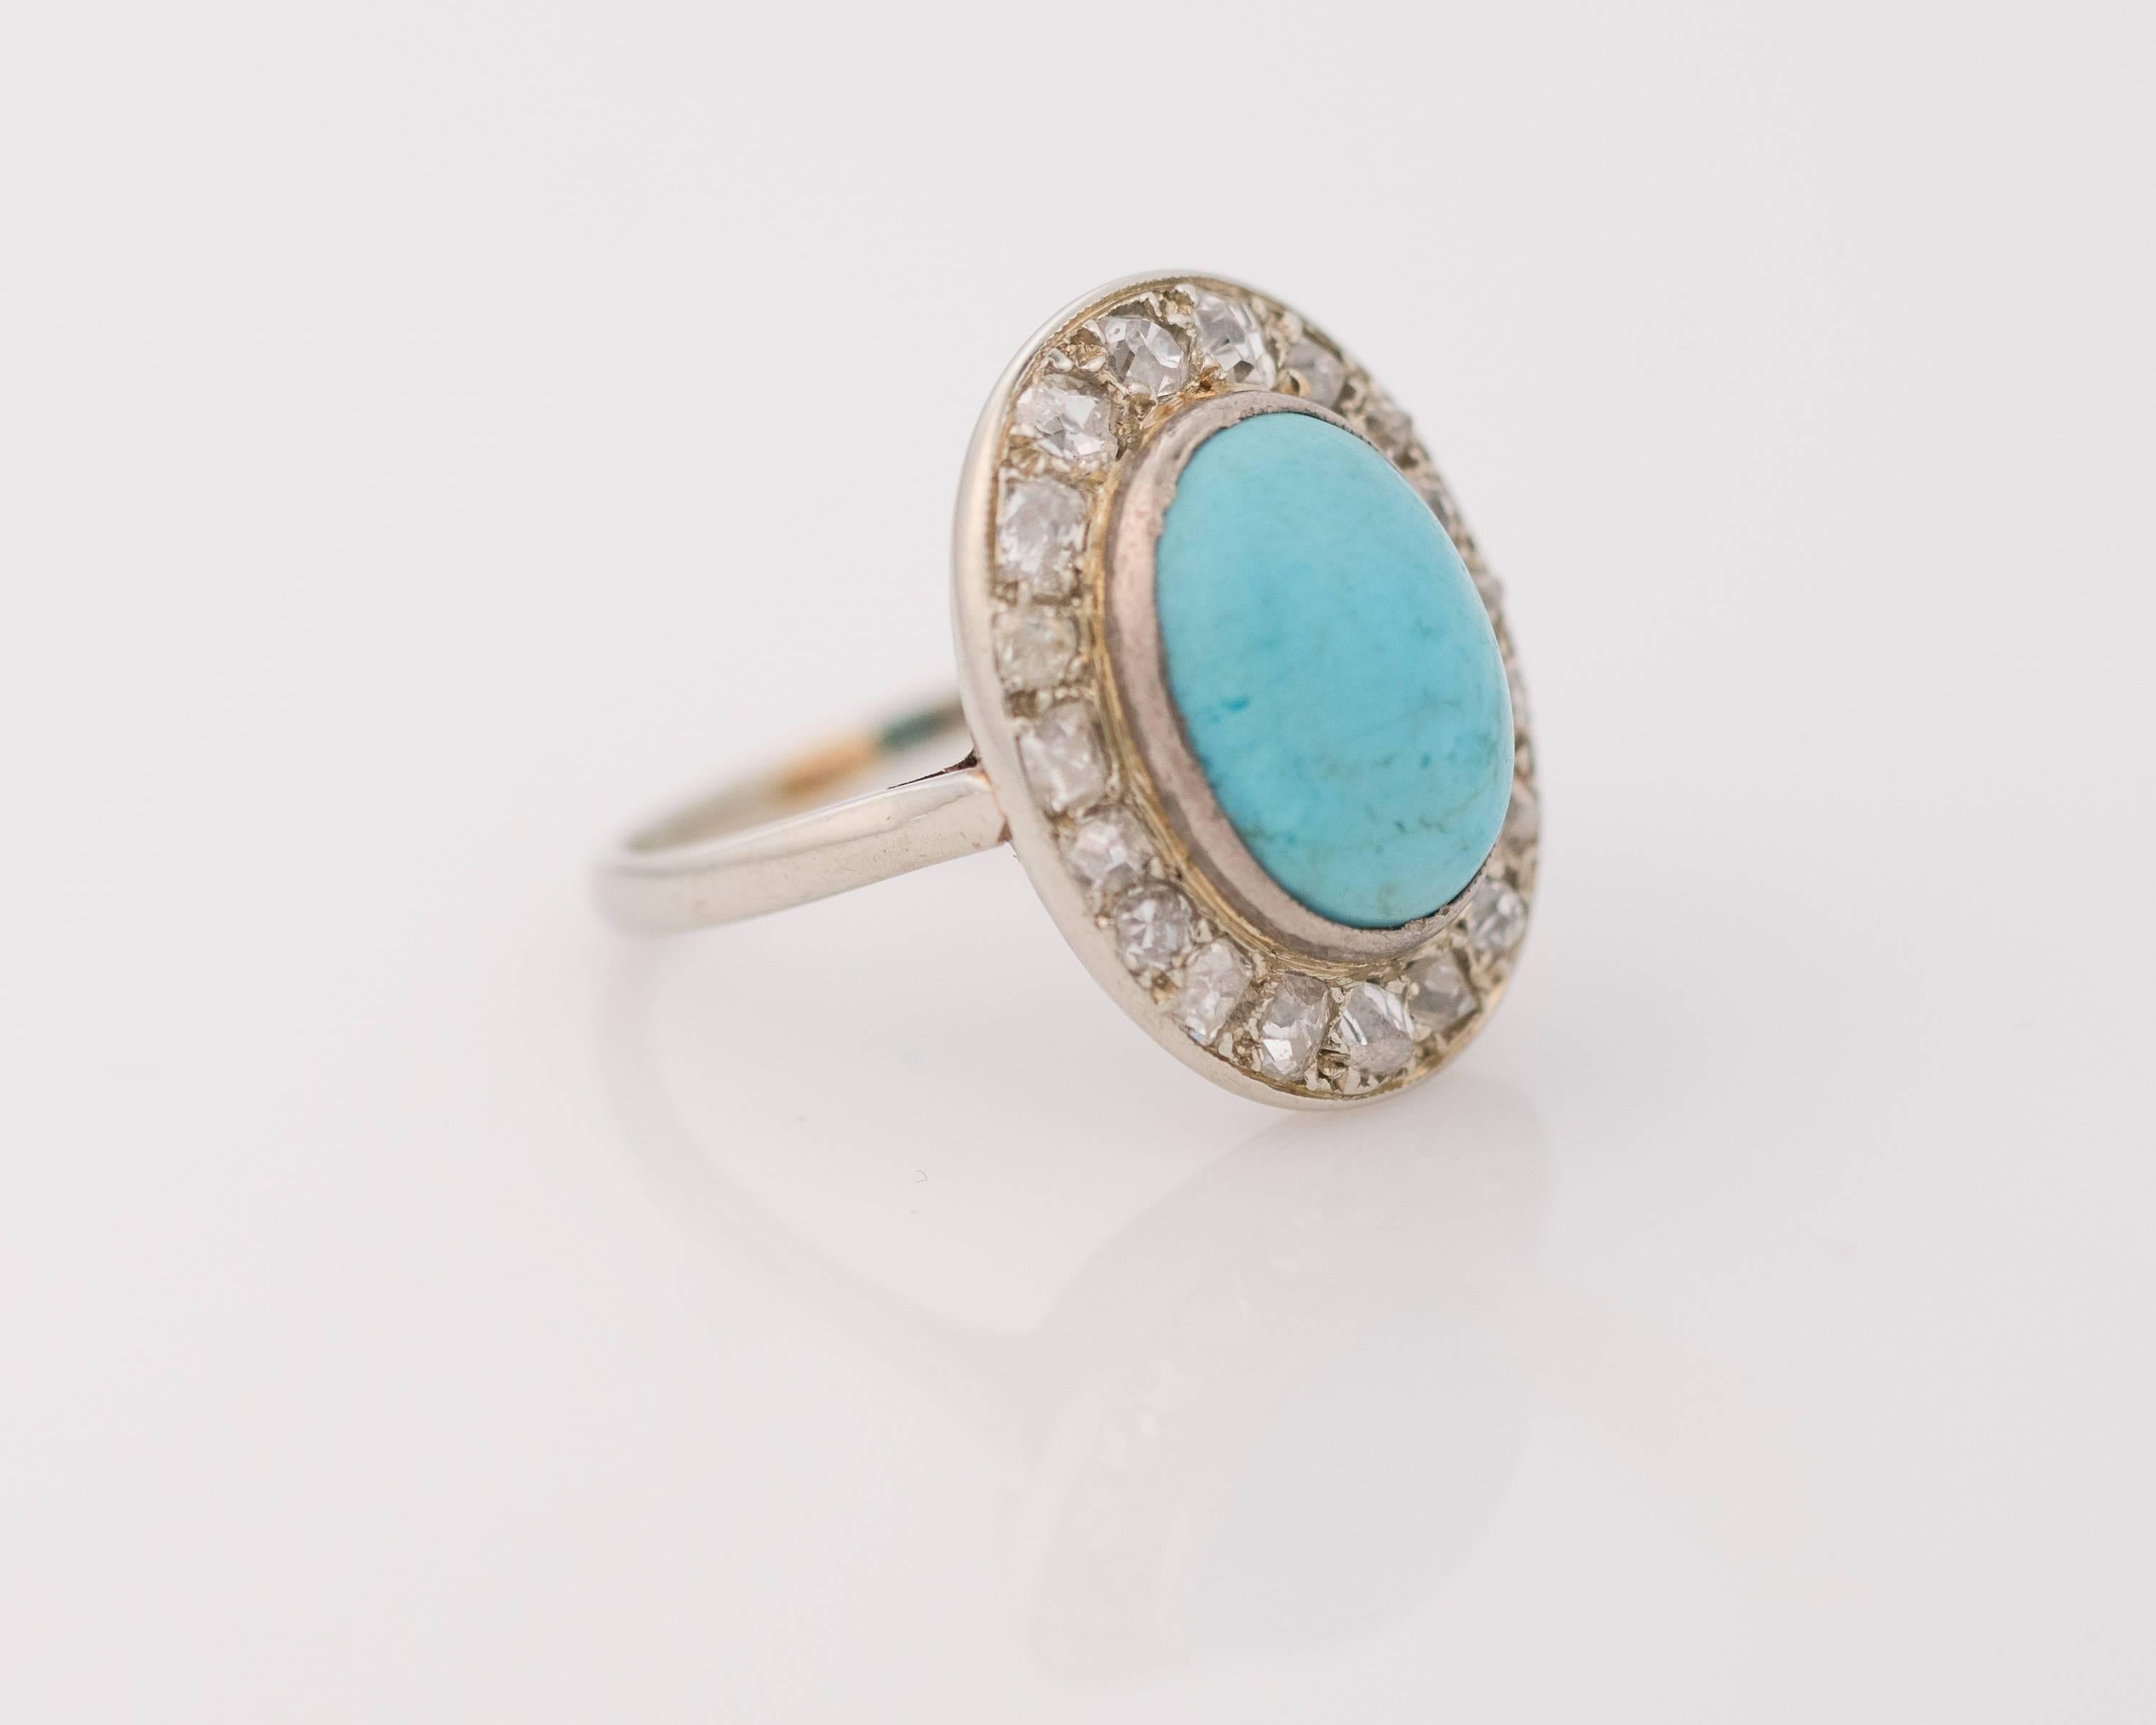 Hello Lovely! This angelic ring features a 0.5 carat total halo of Old Miner cut diamonds surrounding a beautiful blue turquoise oval cabochon. These beautiful gems are set in 14 karat white gold. 
The turquoise cabochon measures 12 mm long x 9mm